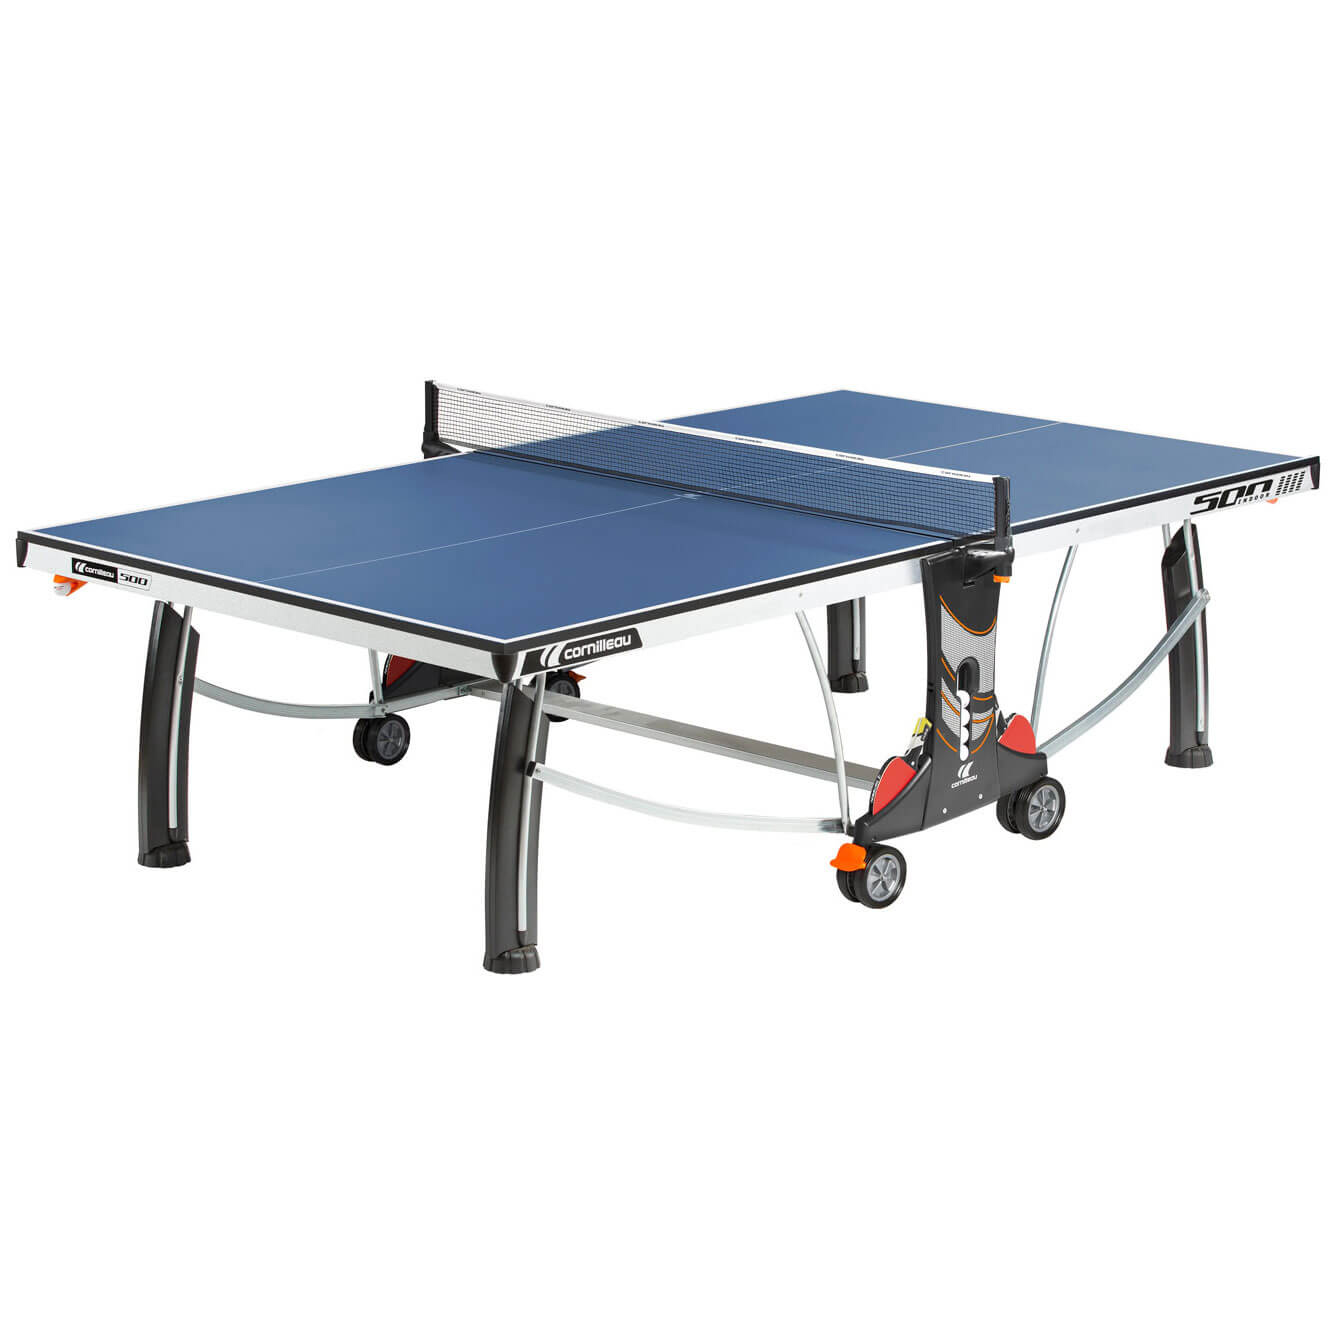 New Table Tennis Return Board Ping Pong Practice Partner; Yinhe 9000 Rubbers 